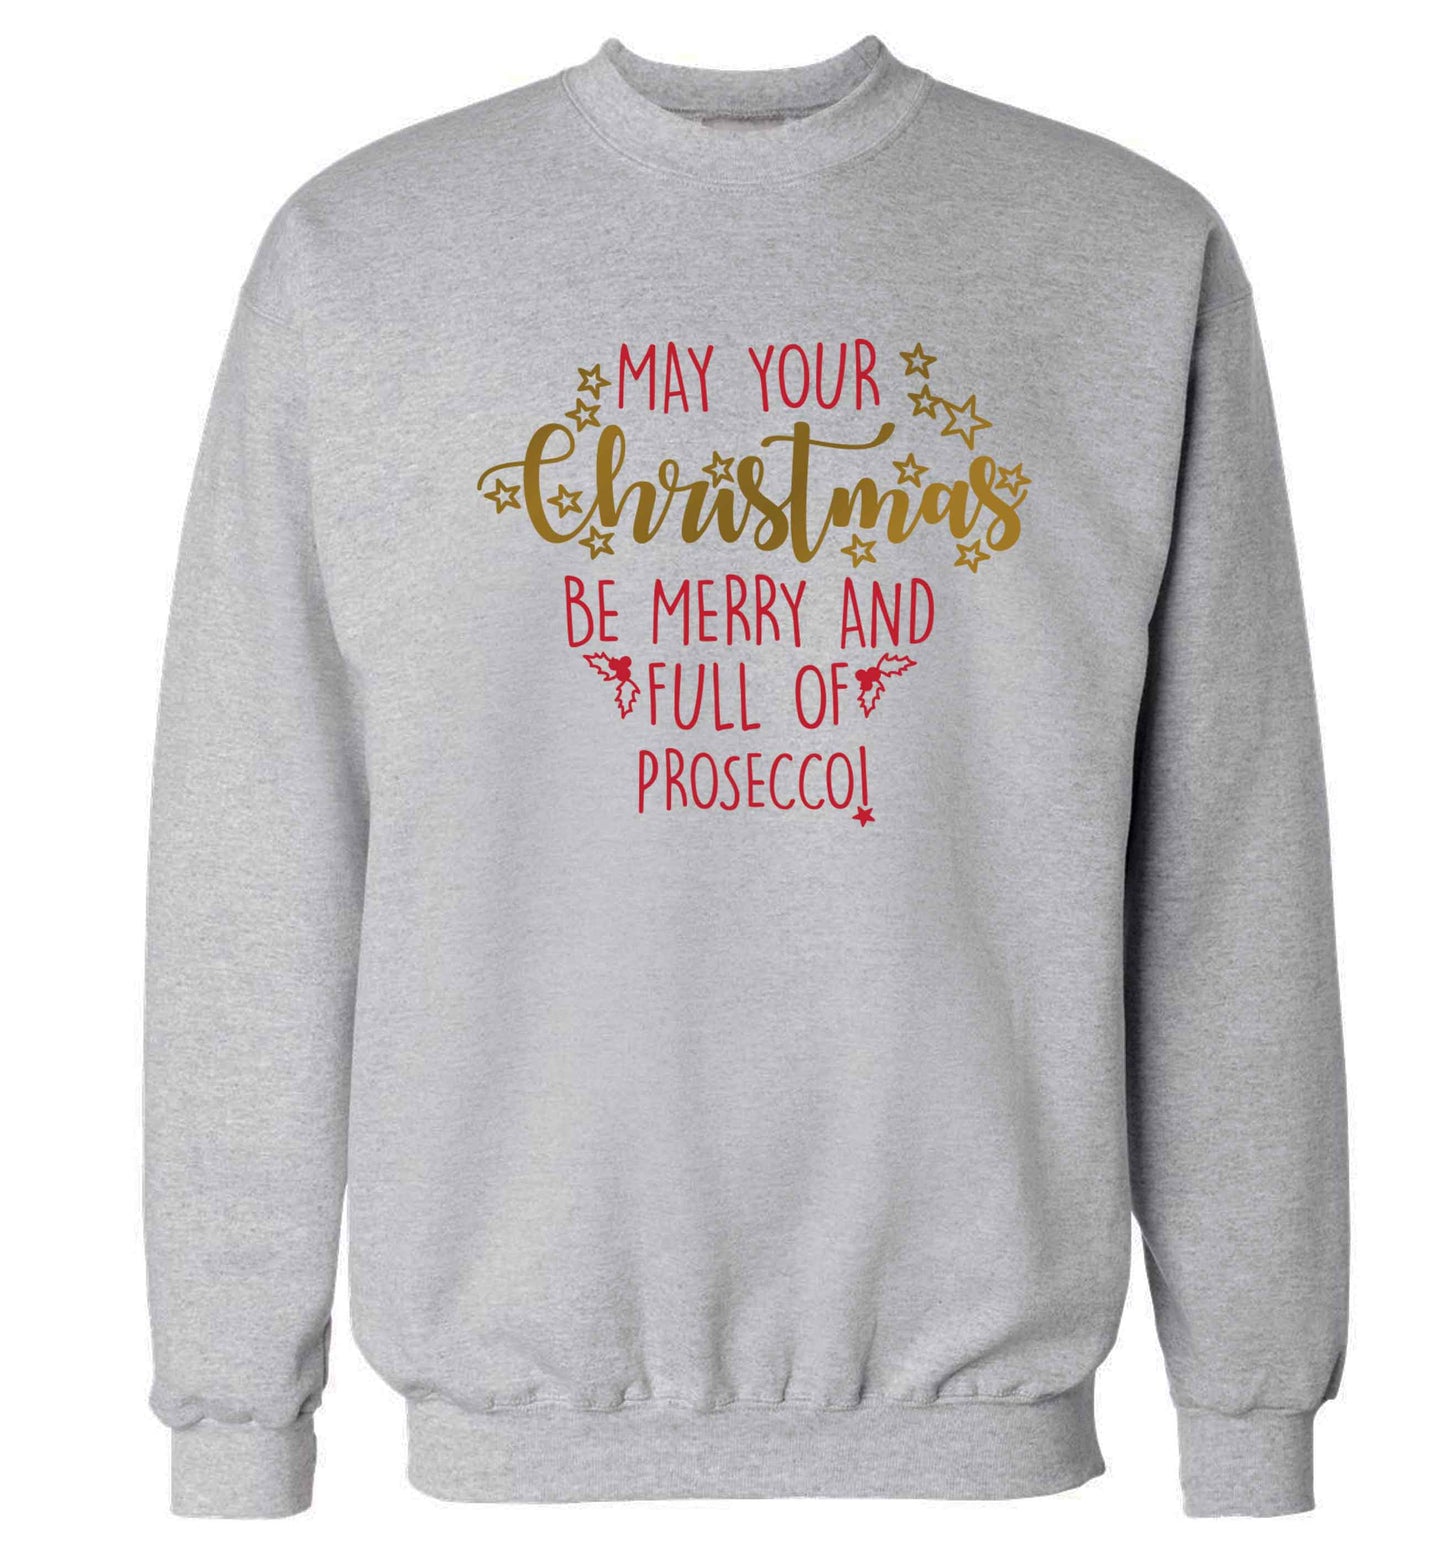 May your Christmas be merry and full of prosecco Adult's unisex grey Sweater 2XL